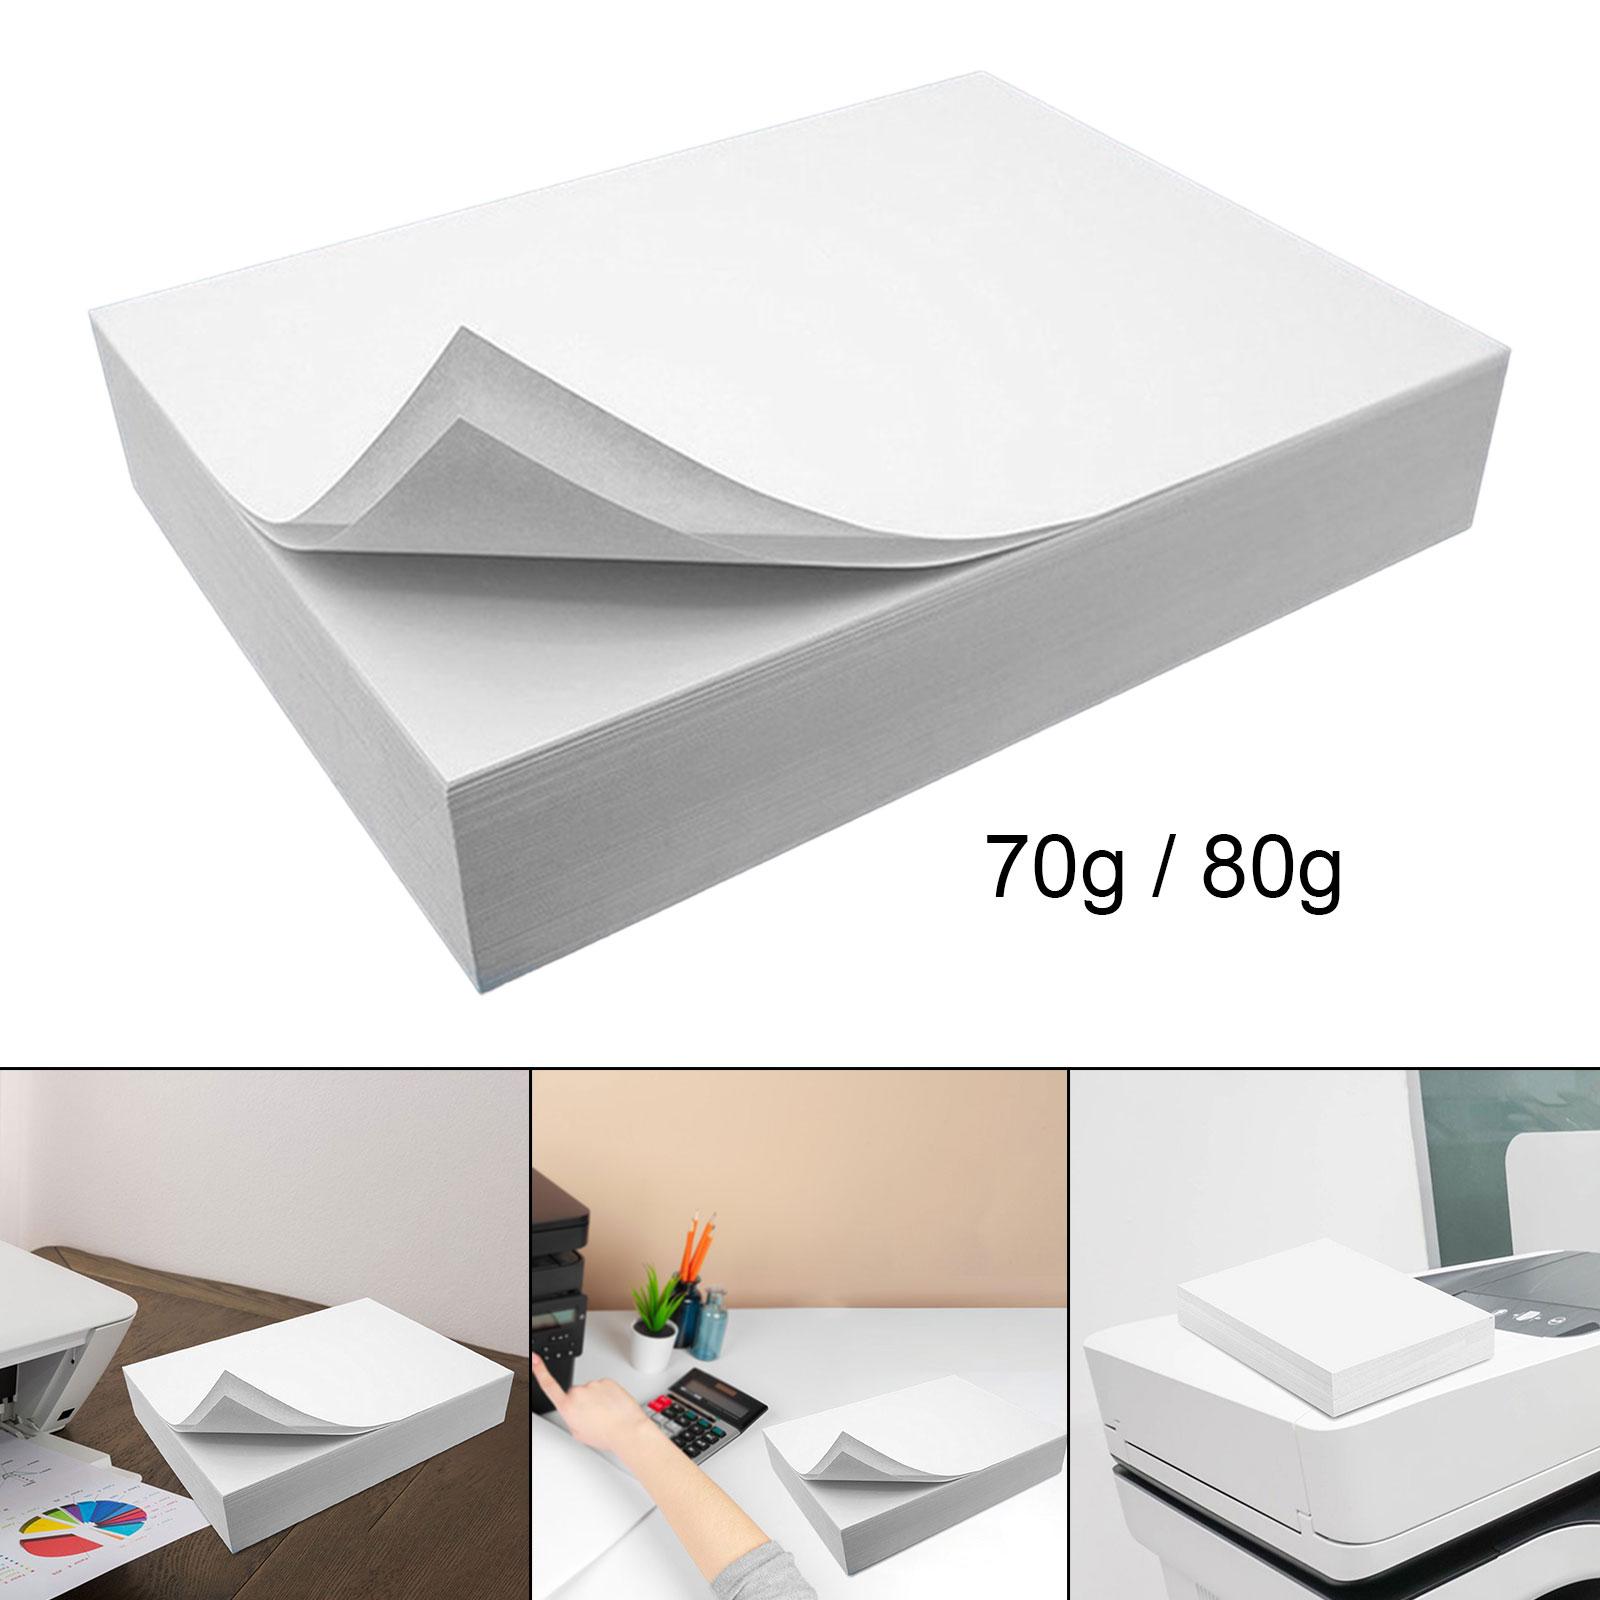 A4 Printing Paper Computer Paper Professional 500 Count Multipurpose Copy Printer Paper for Flyers Communications Reports Memos